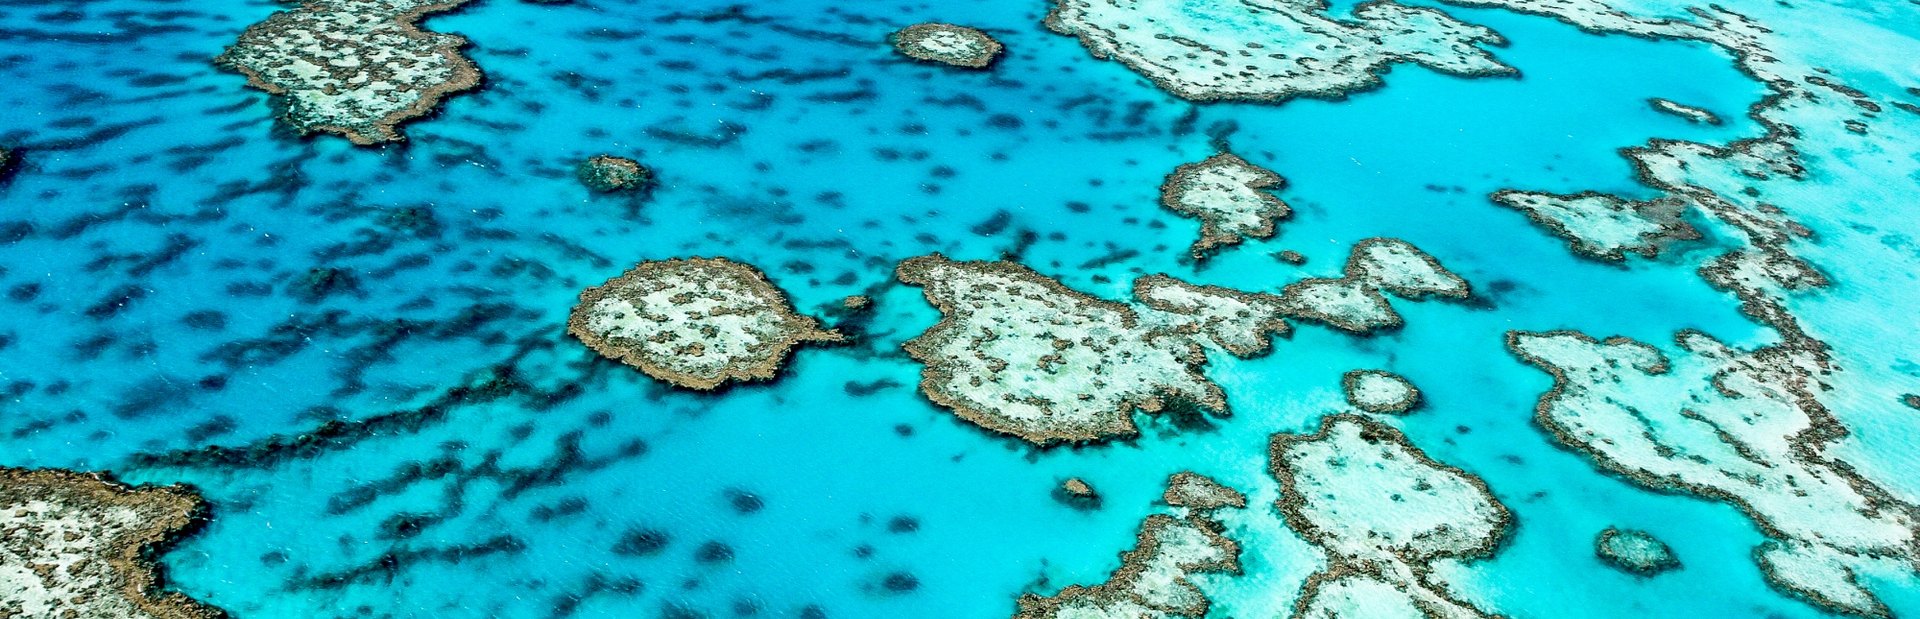 Great Barrier Reef climate photo